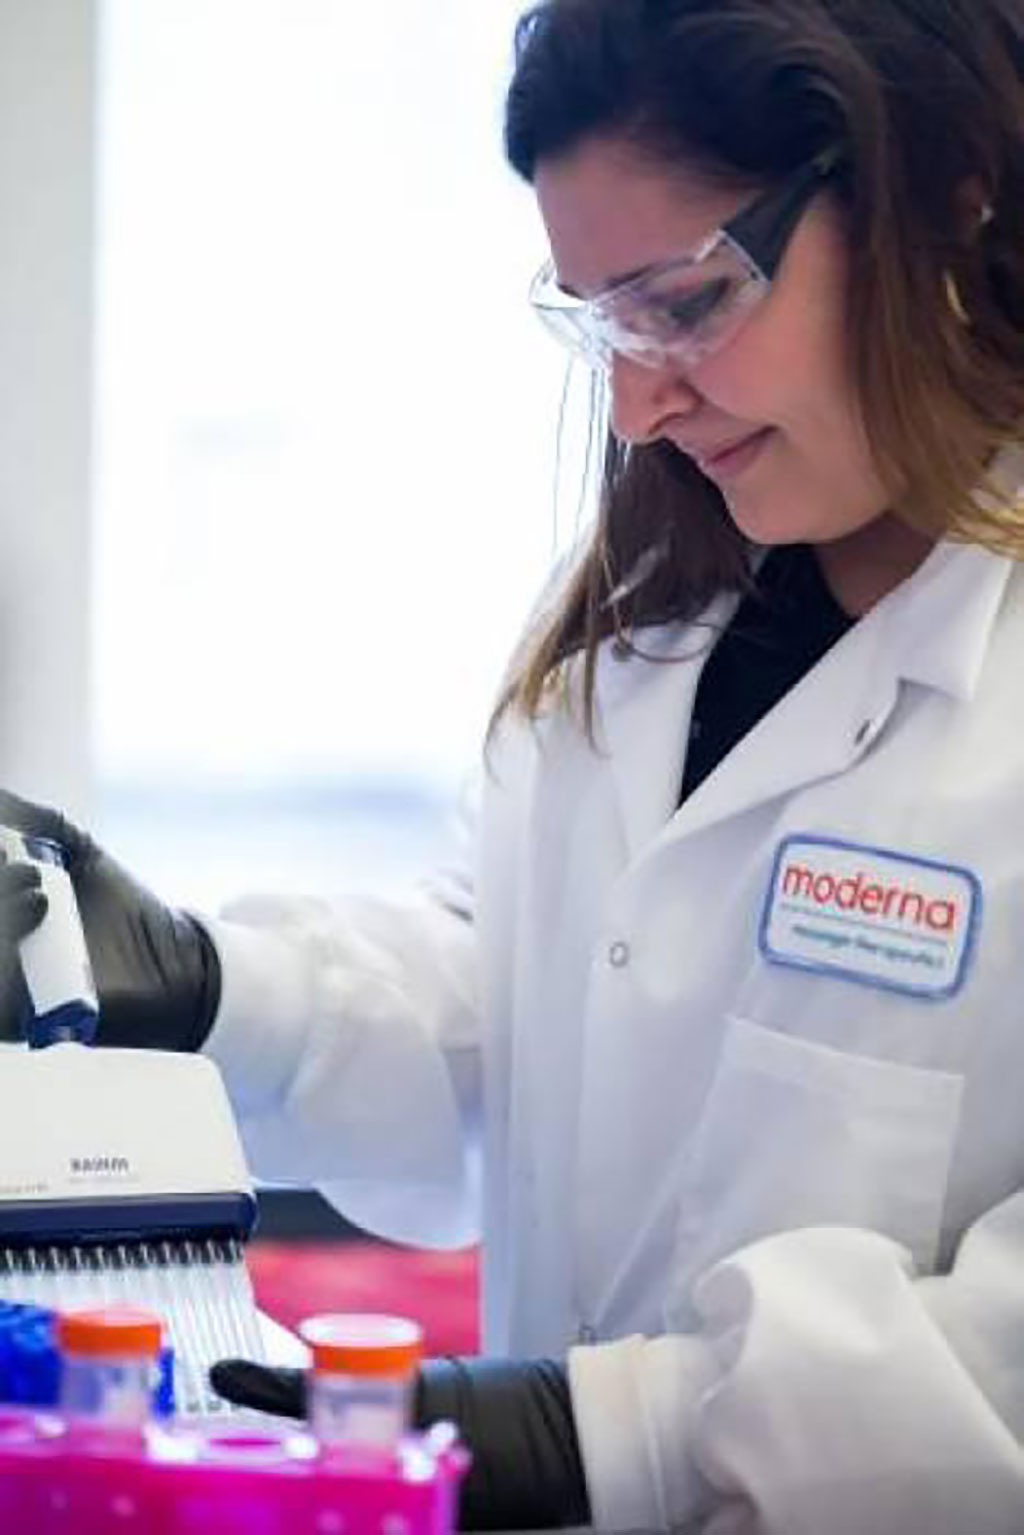 Image: Moderna Begins Dosing in Phase 3 Study of mRNA COVID-19 Vaccine Candidate (Photo courtesy of Moderna, Inc.)